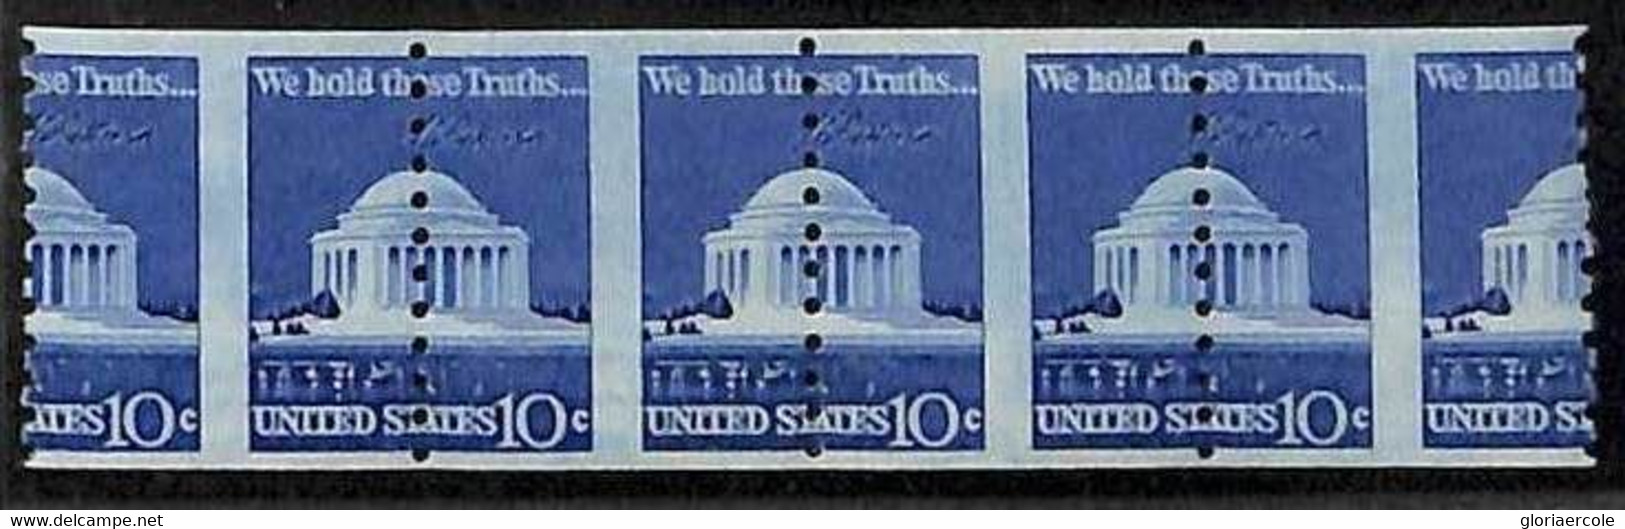 94785d - USA - STAMPS - SC # 1520  MISSPERF Strip Of Four - MNH   Architecture - Errors, Freaks & Oddities (EFOs)